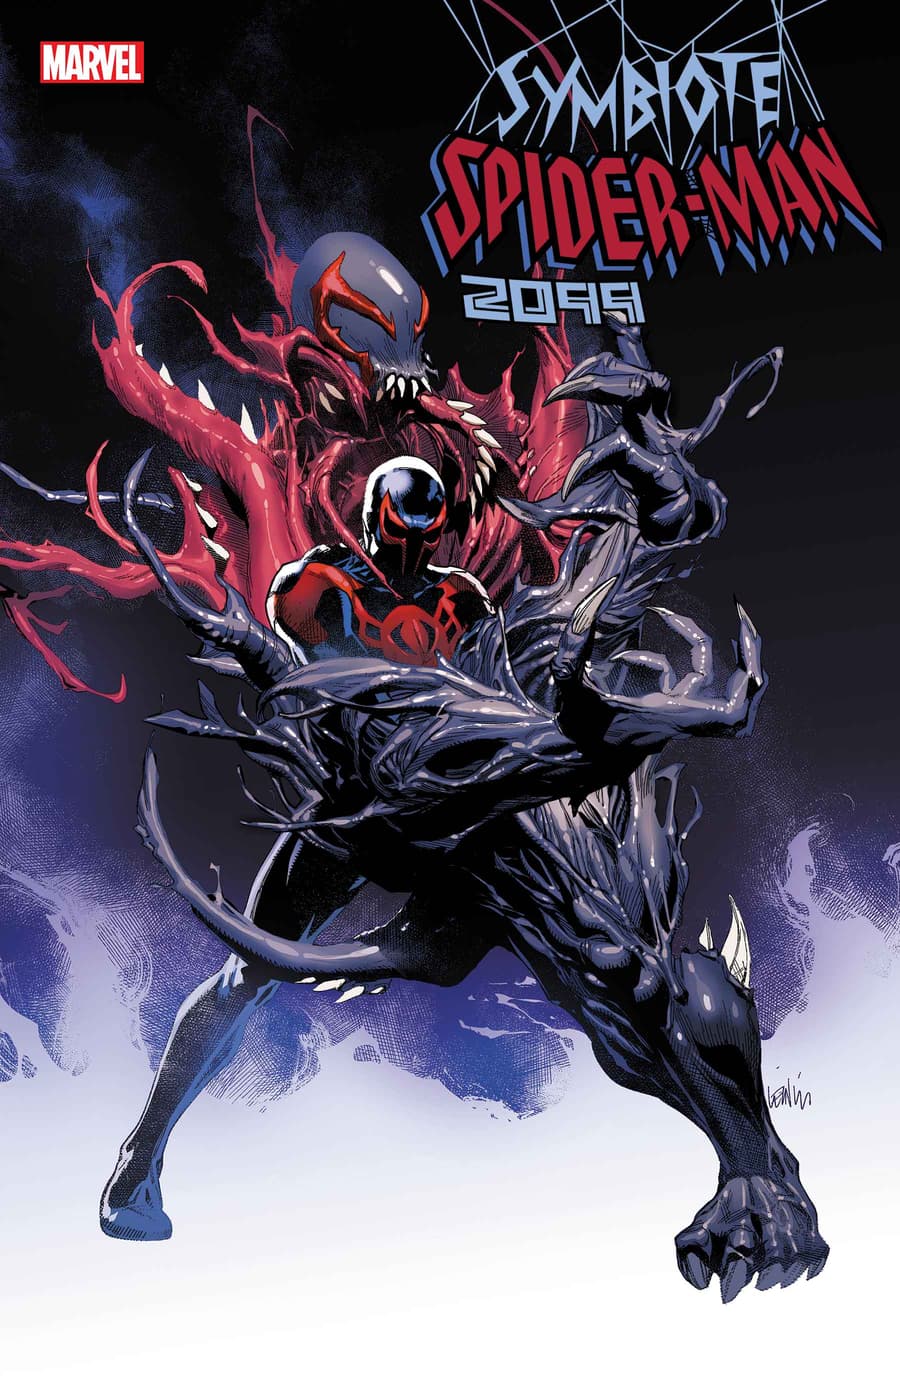 SYMBIOTE SPIDER-MAN 2099 #1 cover by Leinil Francis Yu